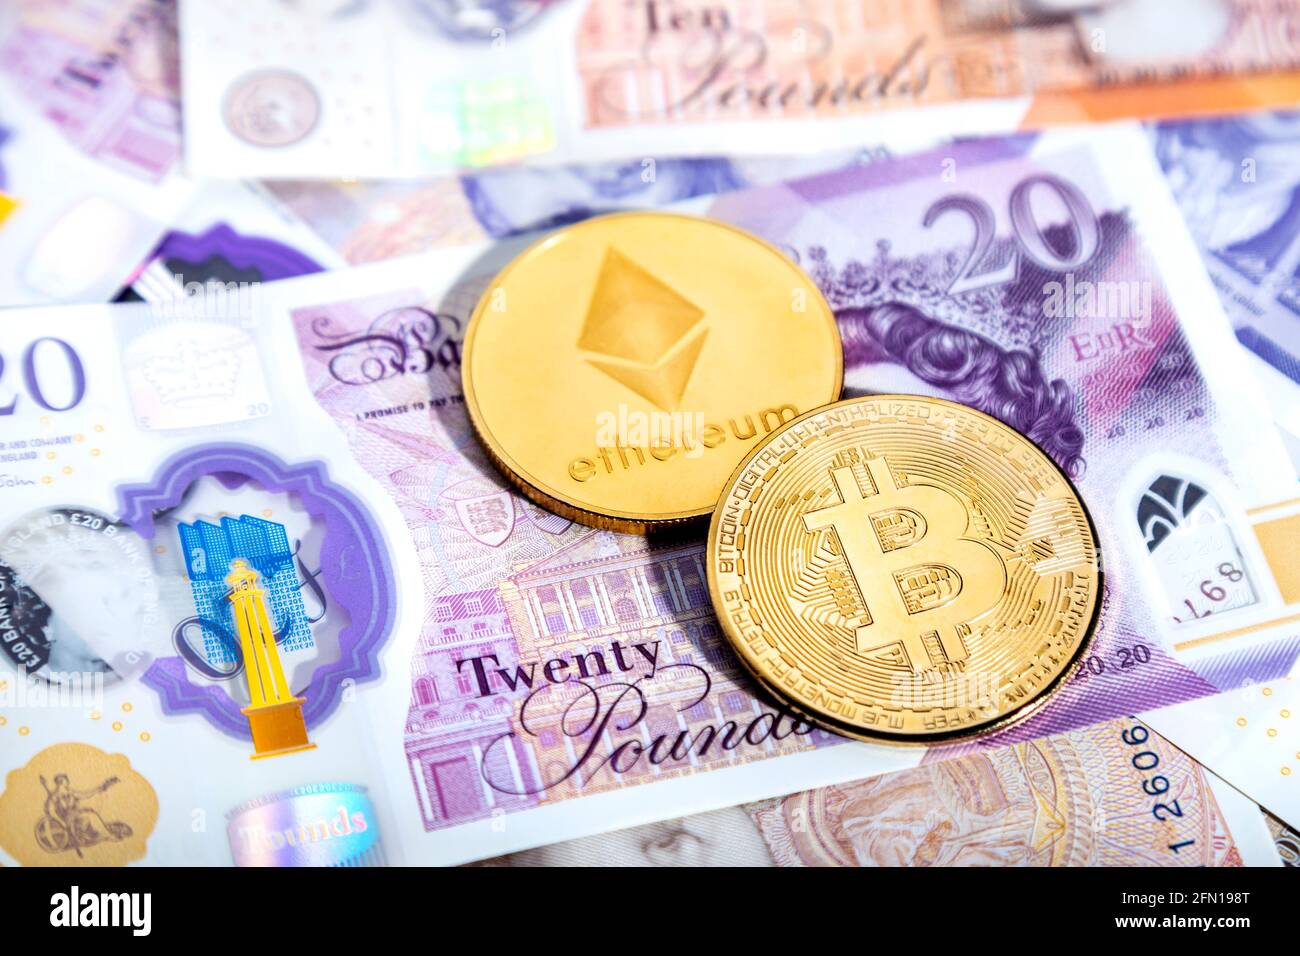 Cryptocurrency bitcoin and ether (ethereum) token coins against British Ponuds GBP Stock Photo